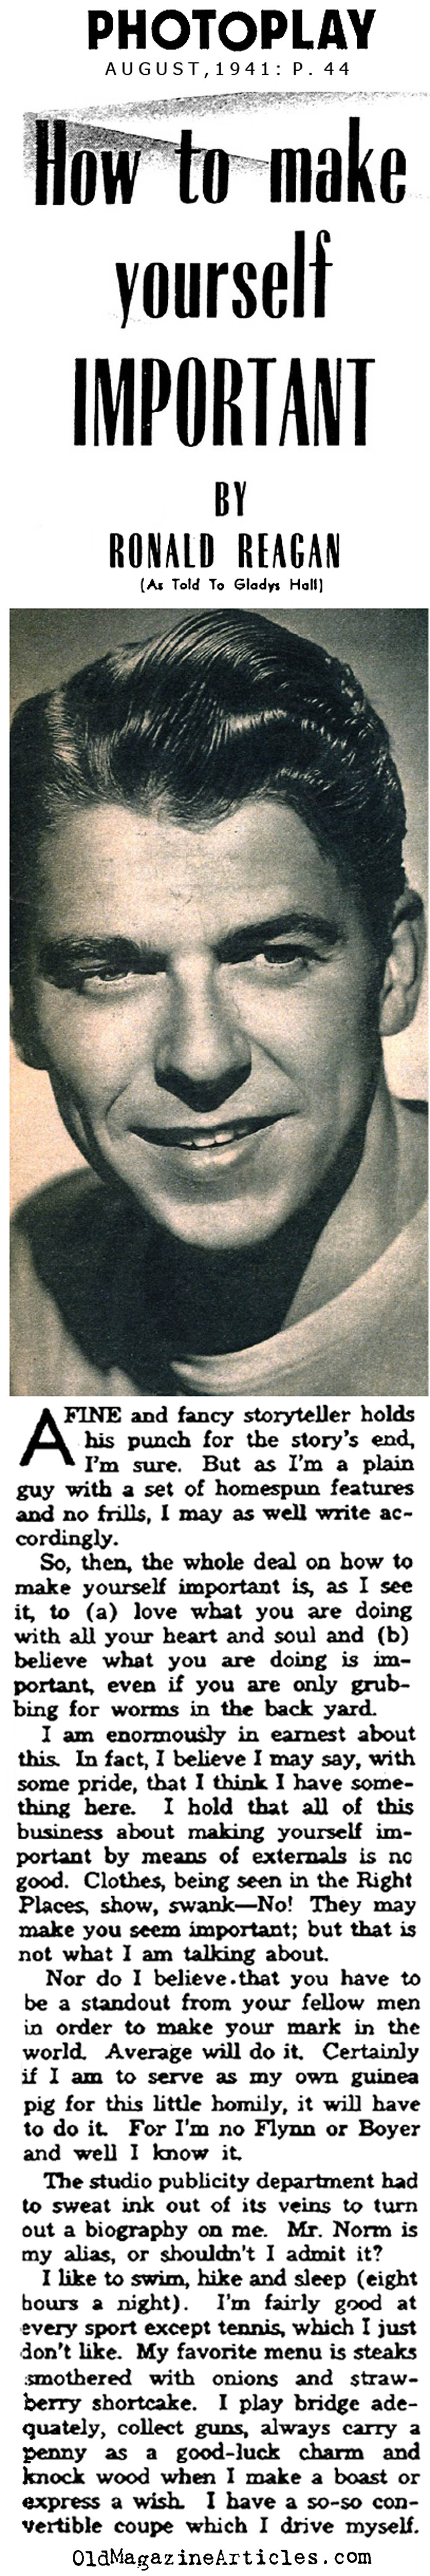 Ronald Reagan in his Own Words (Photoplay Magazine, 1942)